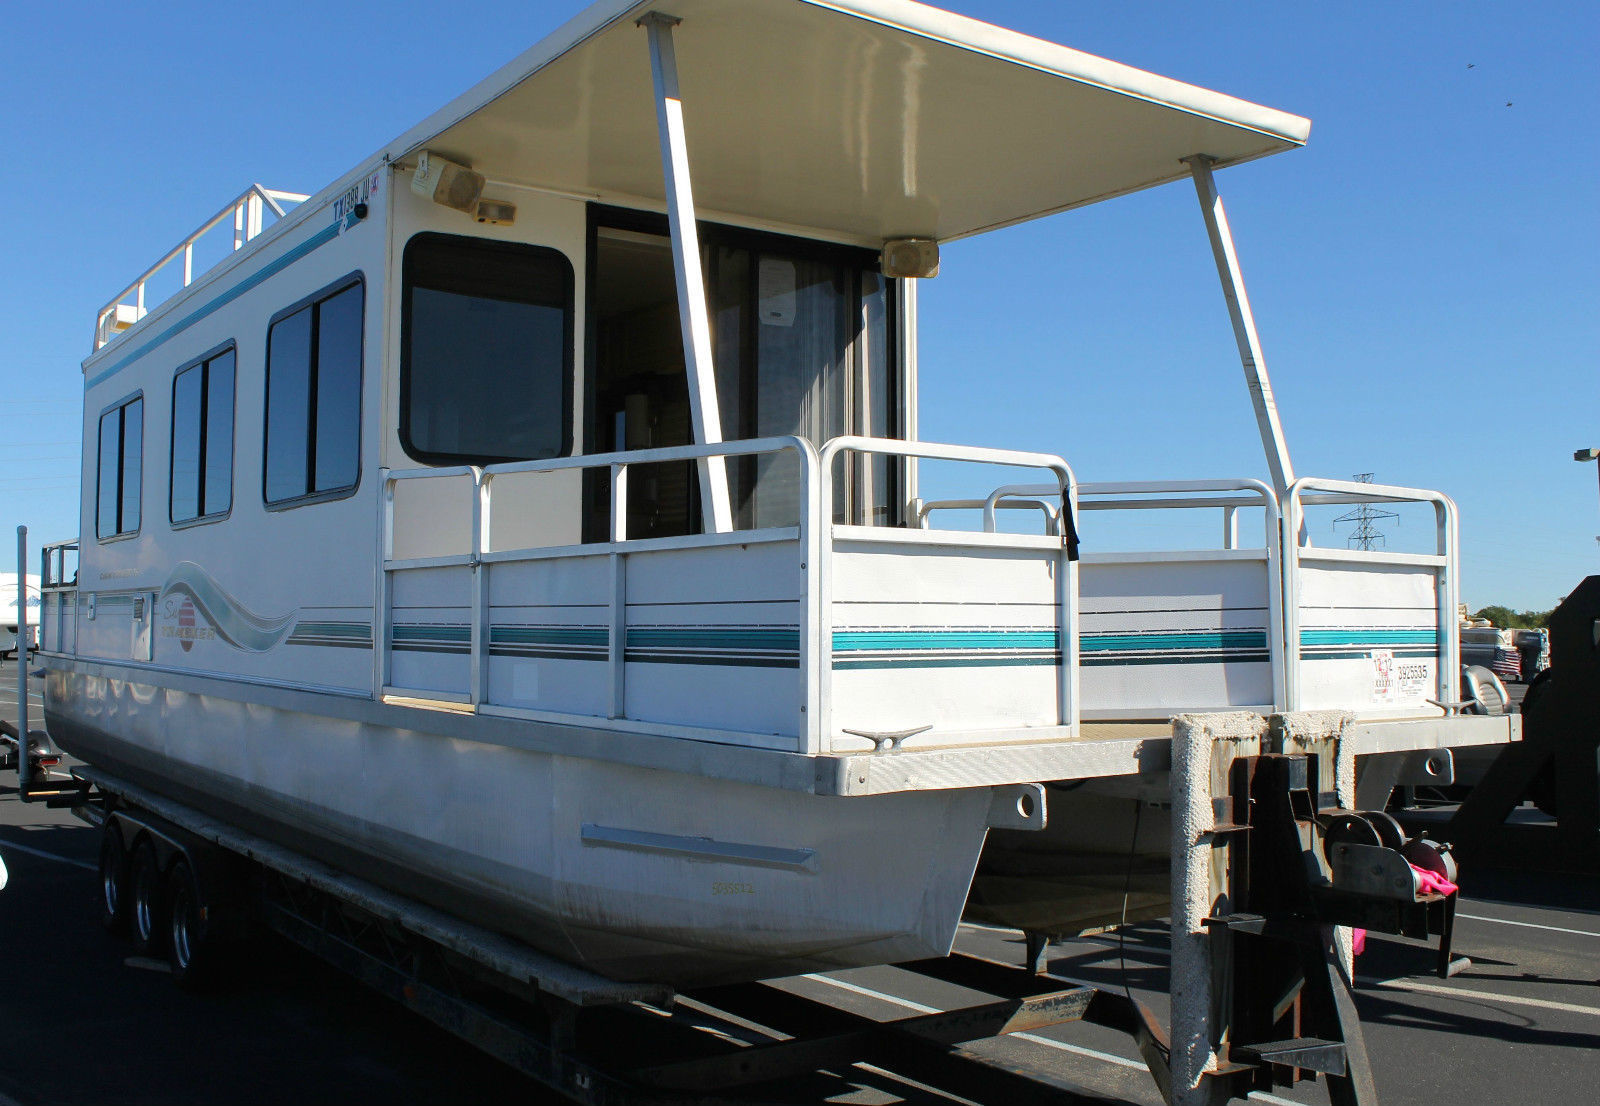 Tracker 35 CABIN CRUISER 1996 for sale for 1,525 Boats